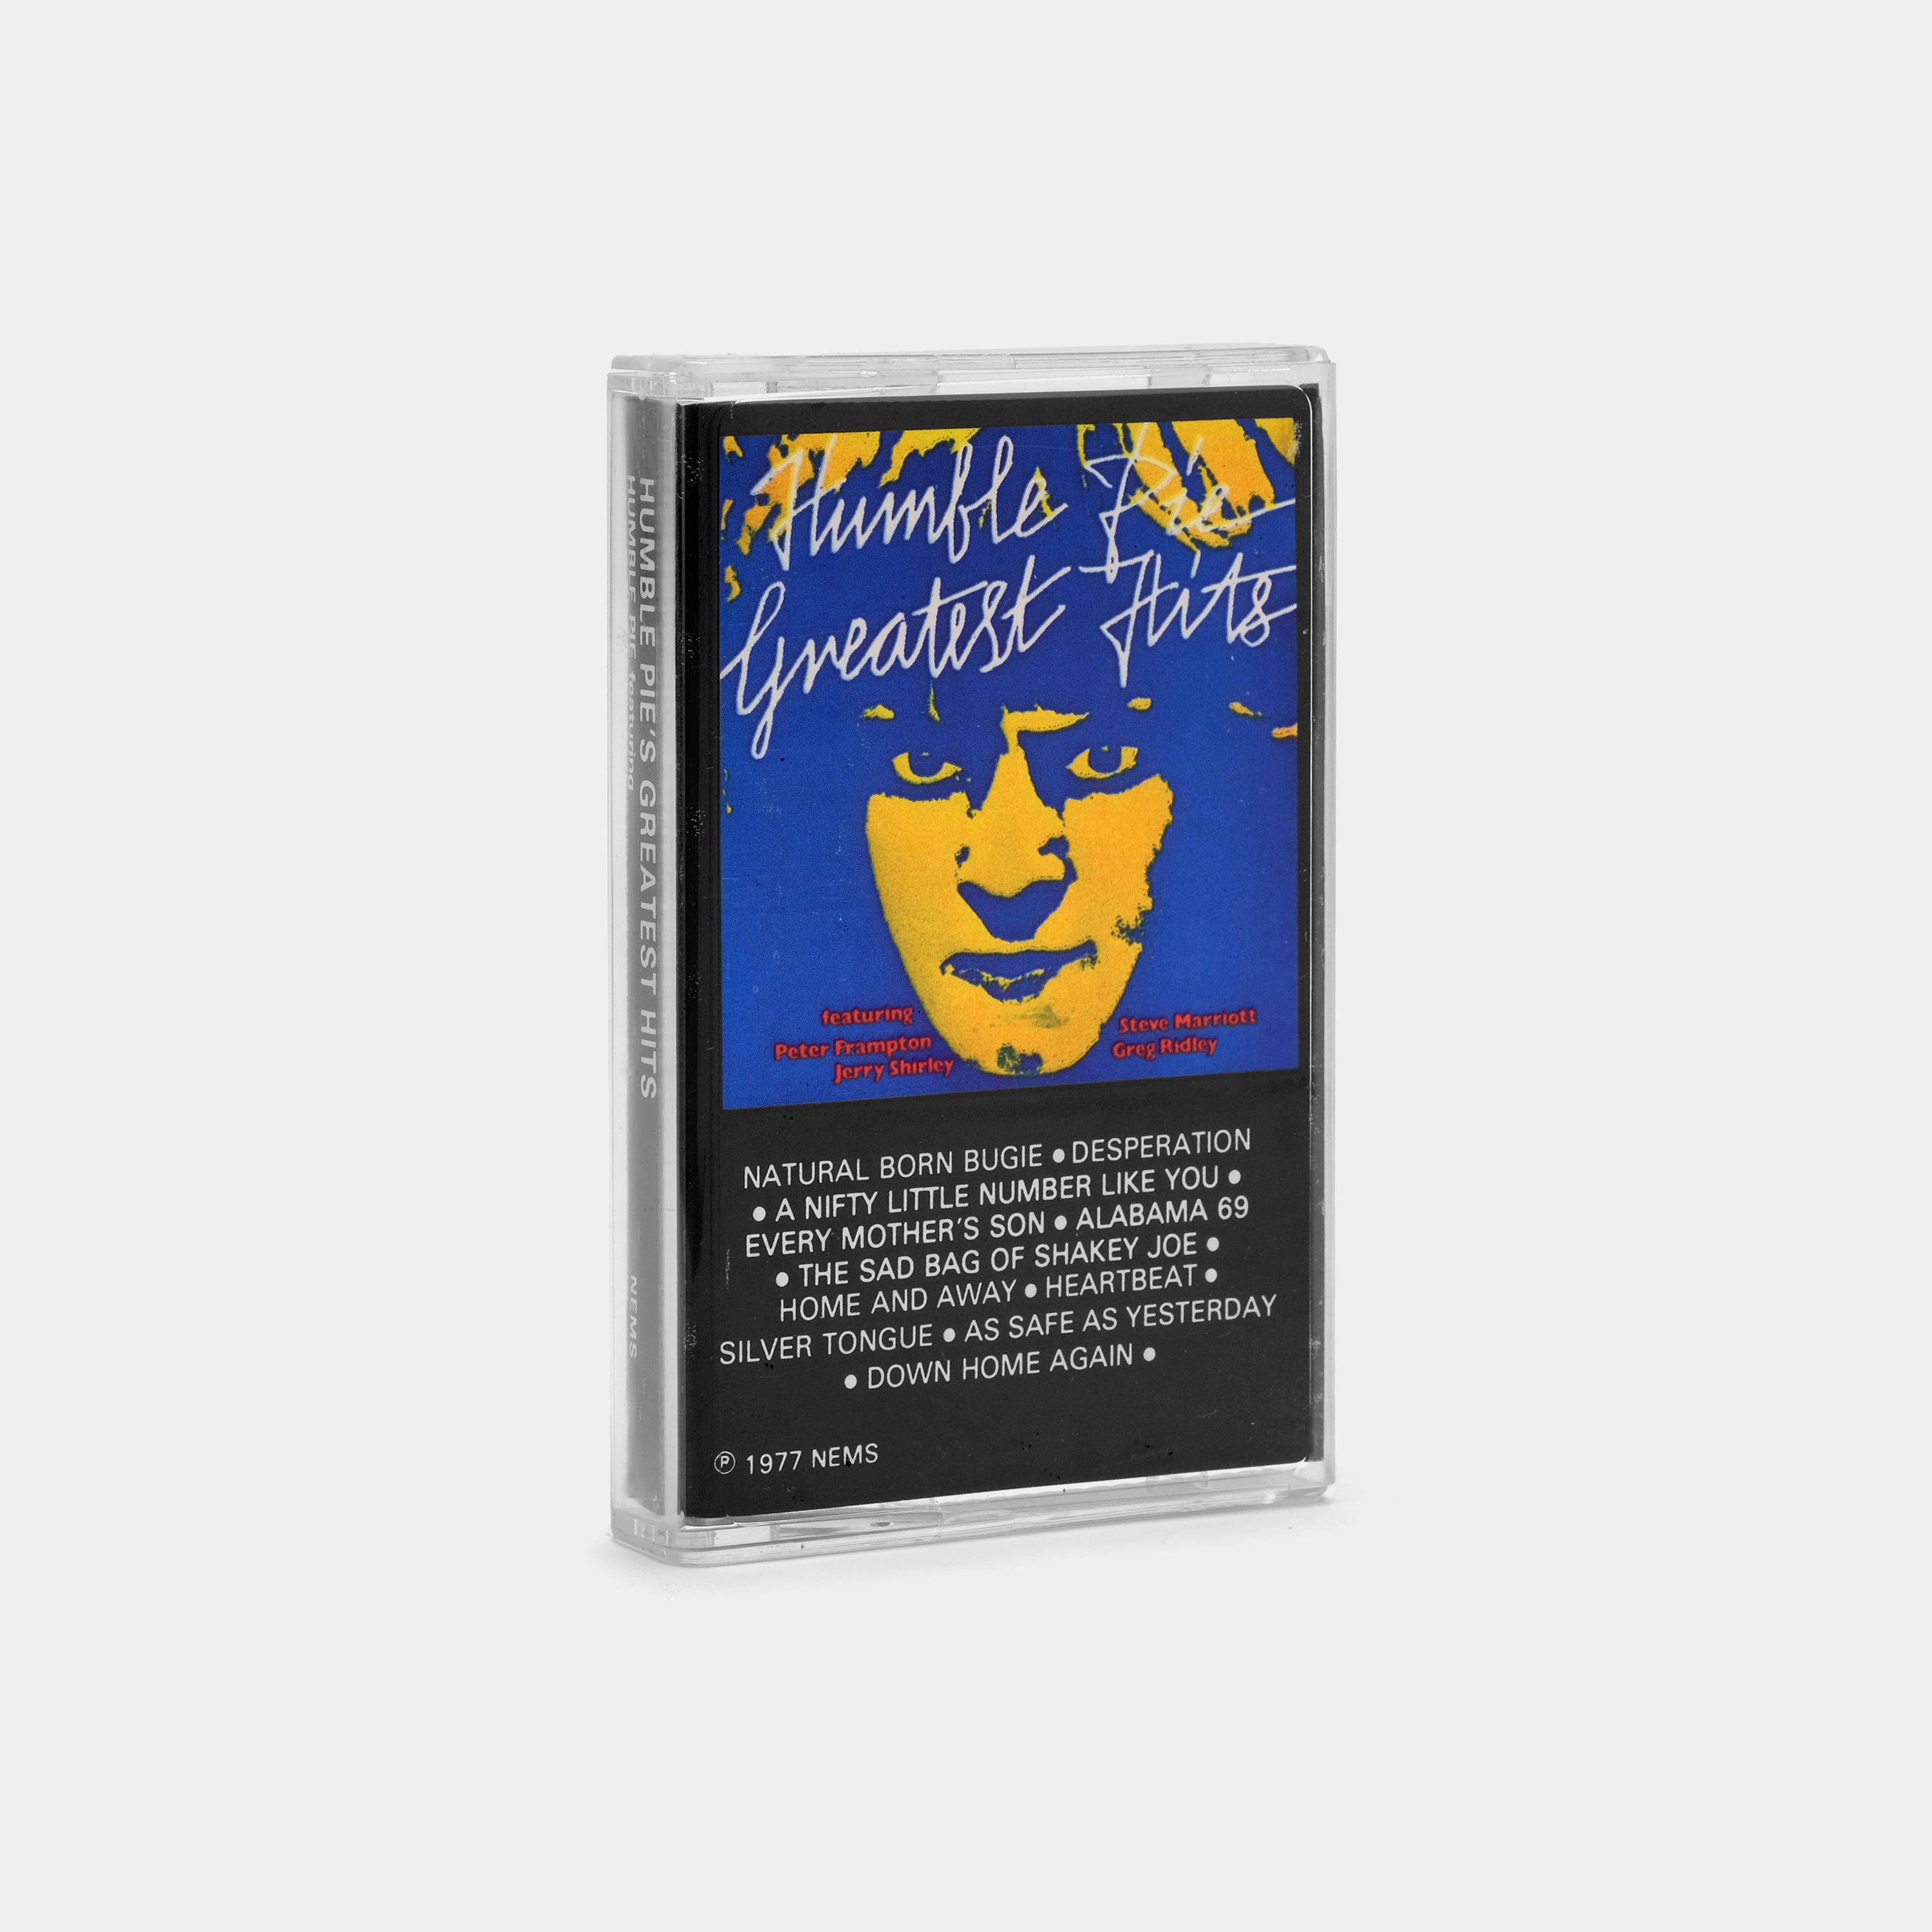 Humble Pie - Greatest Hits Cassette Tape